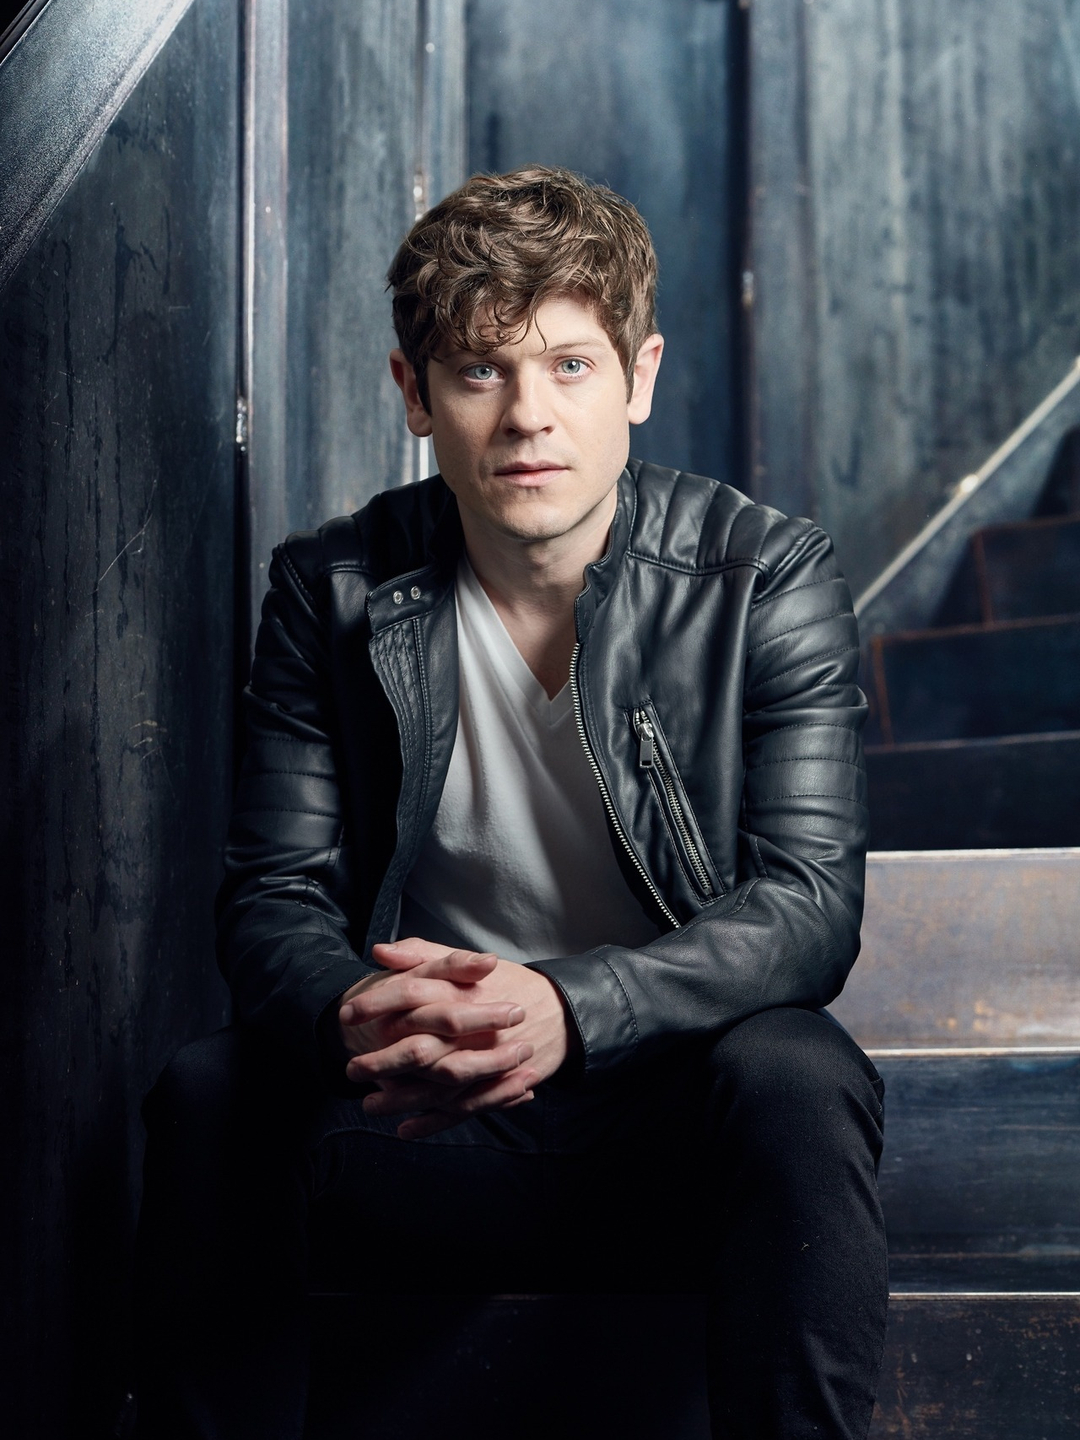 Iwan Rheon how did he became famous